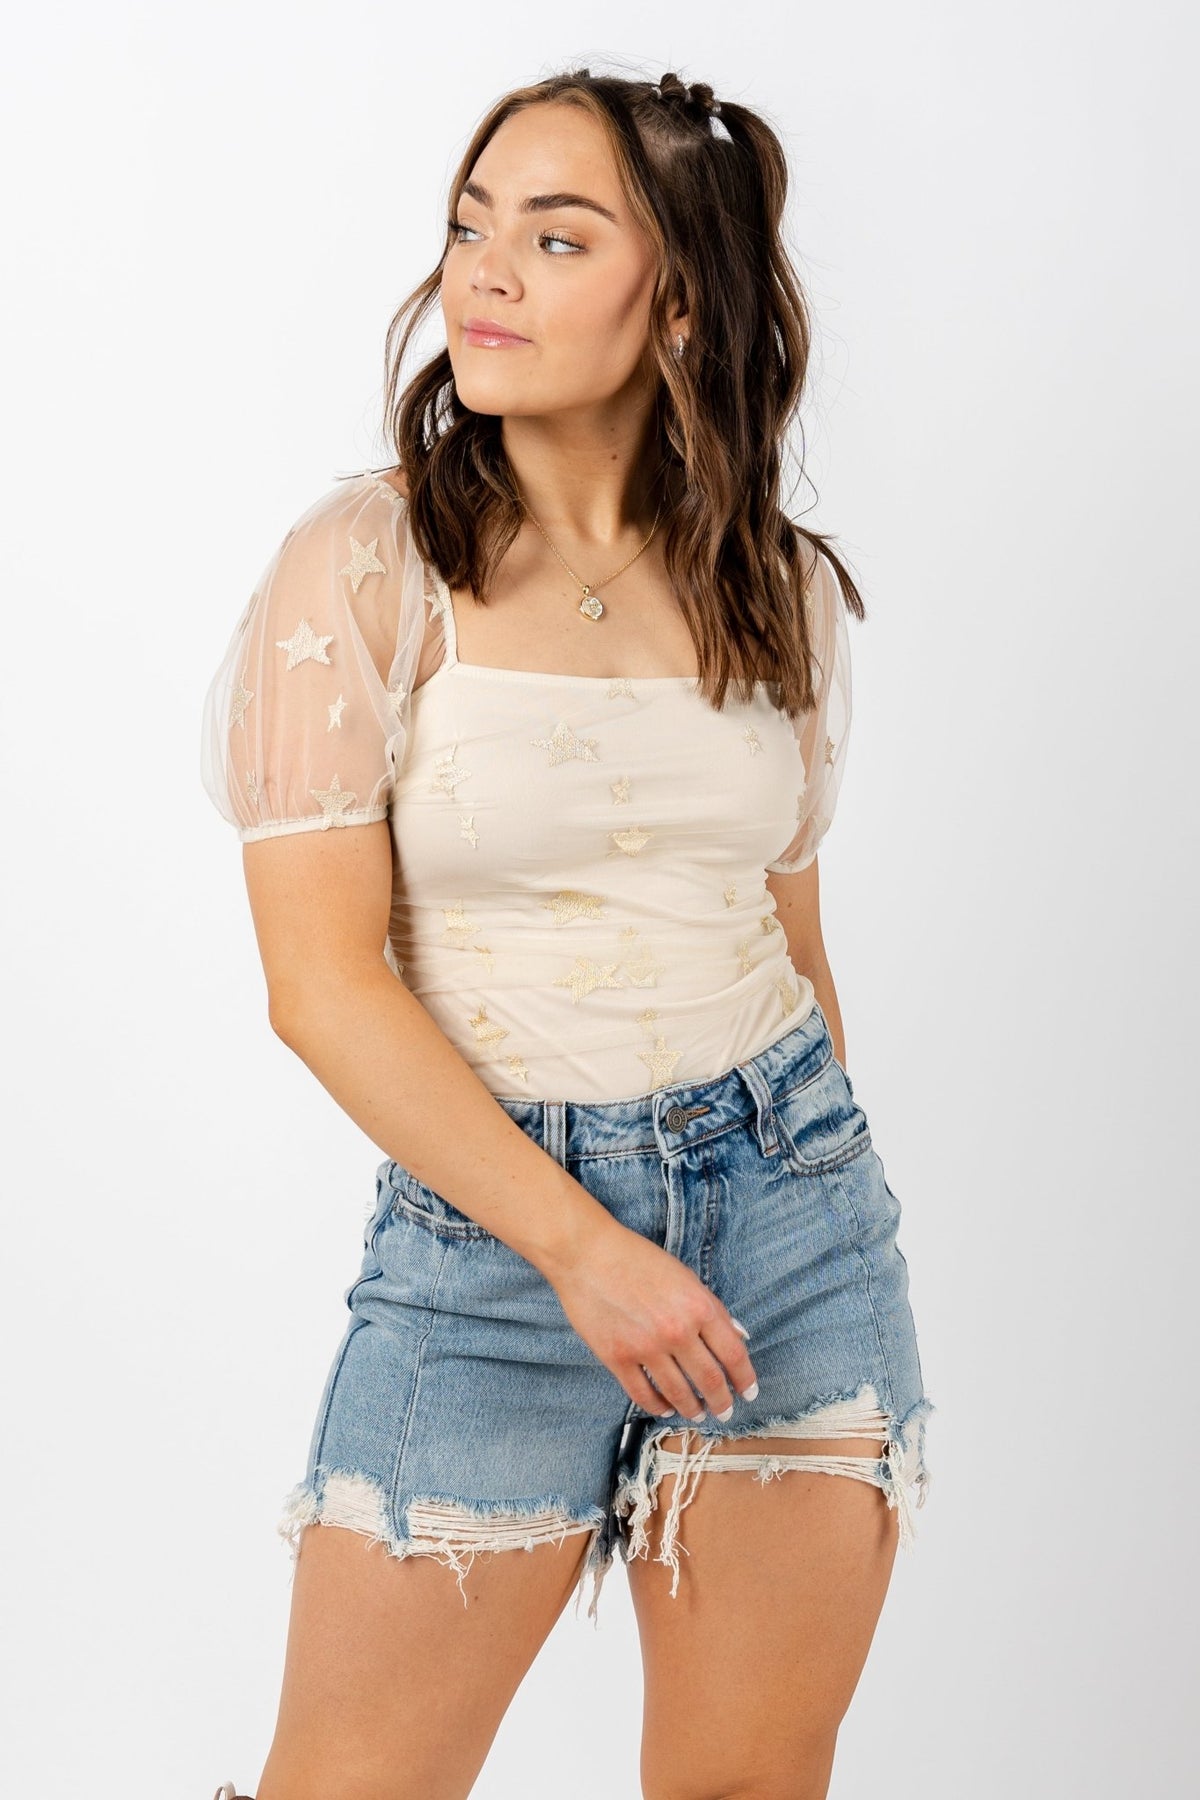 Star mesh bodysuit cream/gold - Trendy bodysuit - Cute American Summer Collection at Lush Fashion Lounge Boutique in Oklahoma City